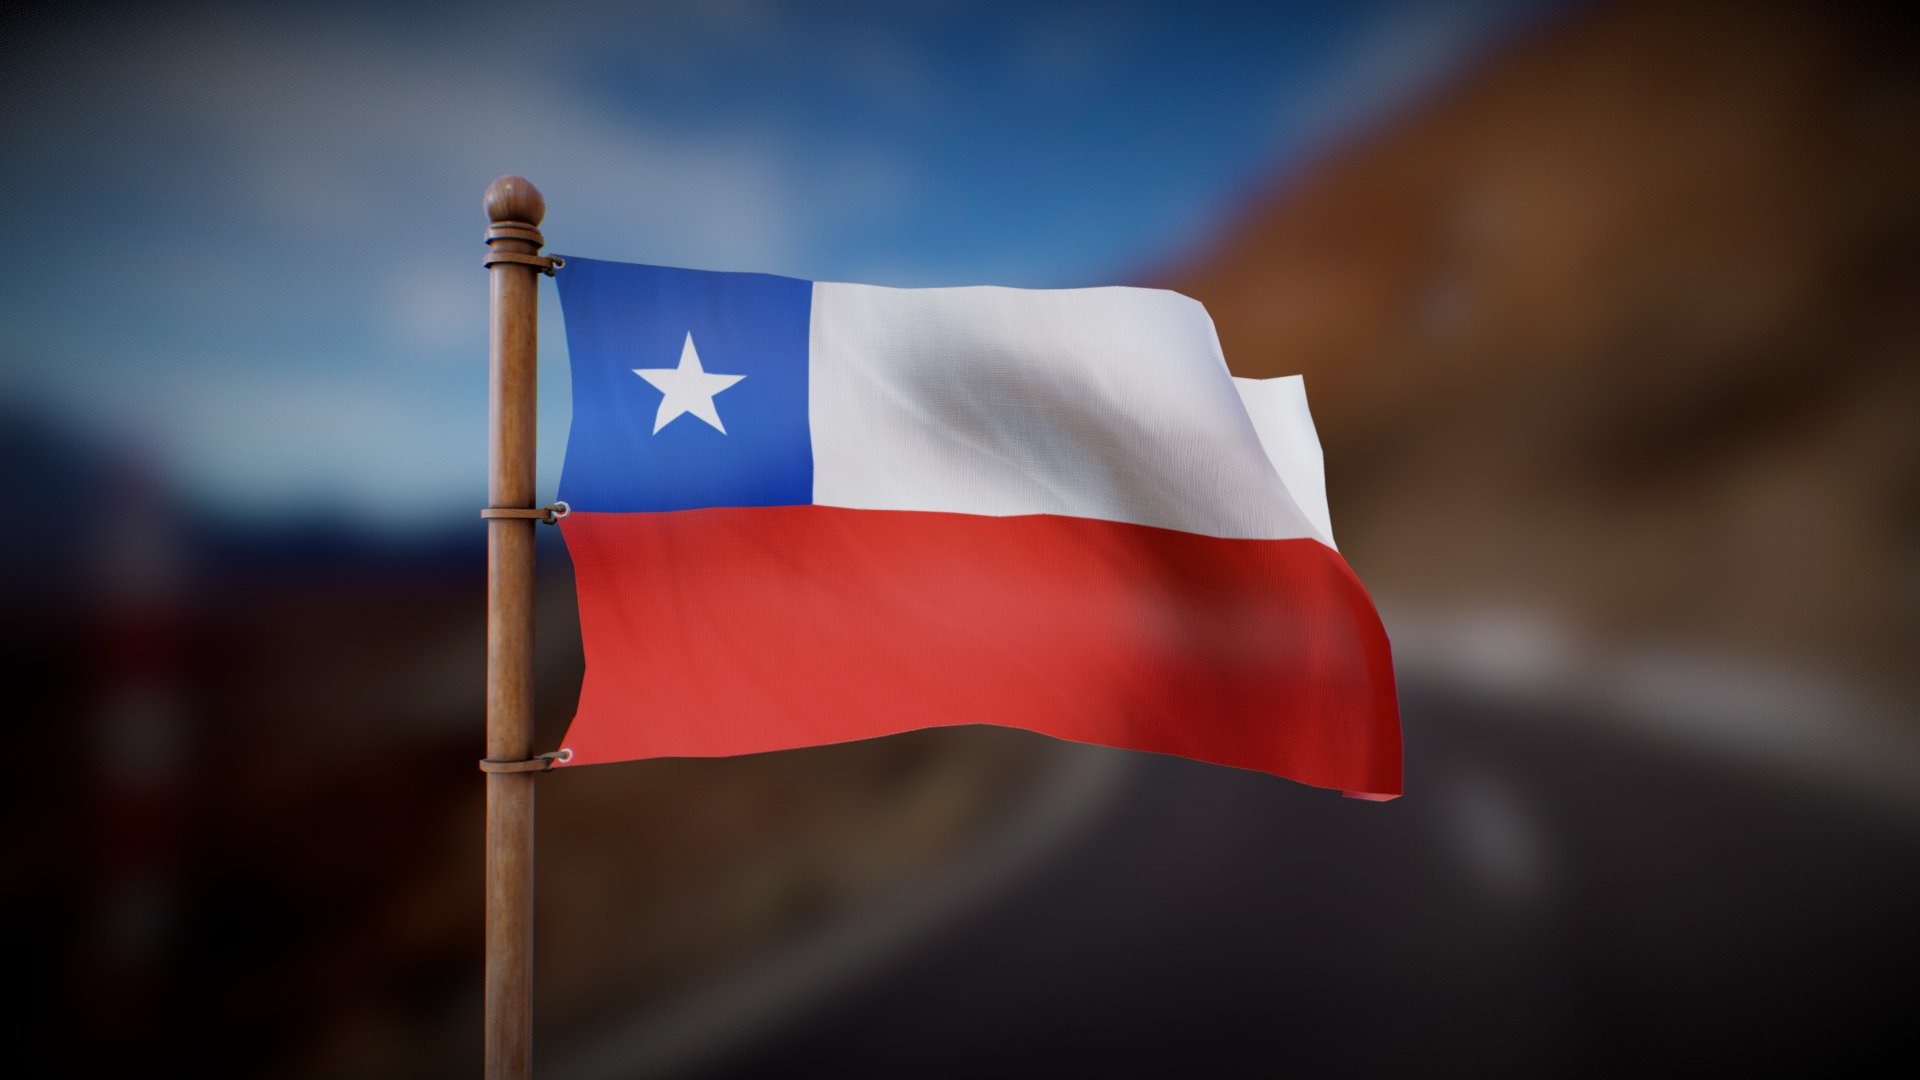 Flag waving in the wind in a looped animation

Joint Animation, perfect for any purpose
4K PBR textures

Feel free to DM me for anu question of custom requests :) - Flag of Chile - Wind Animated Loop - Buy Royalty Free 3D model by Deftroy 3d model